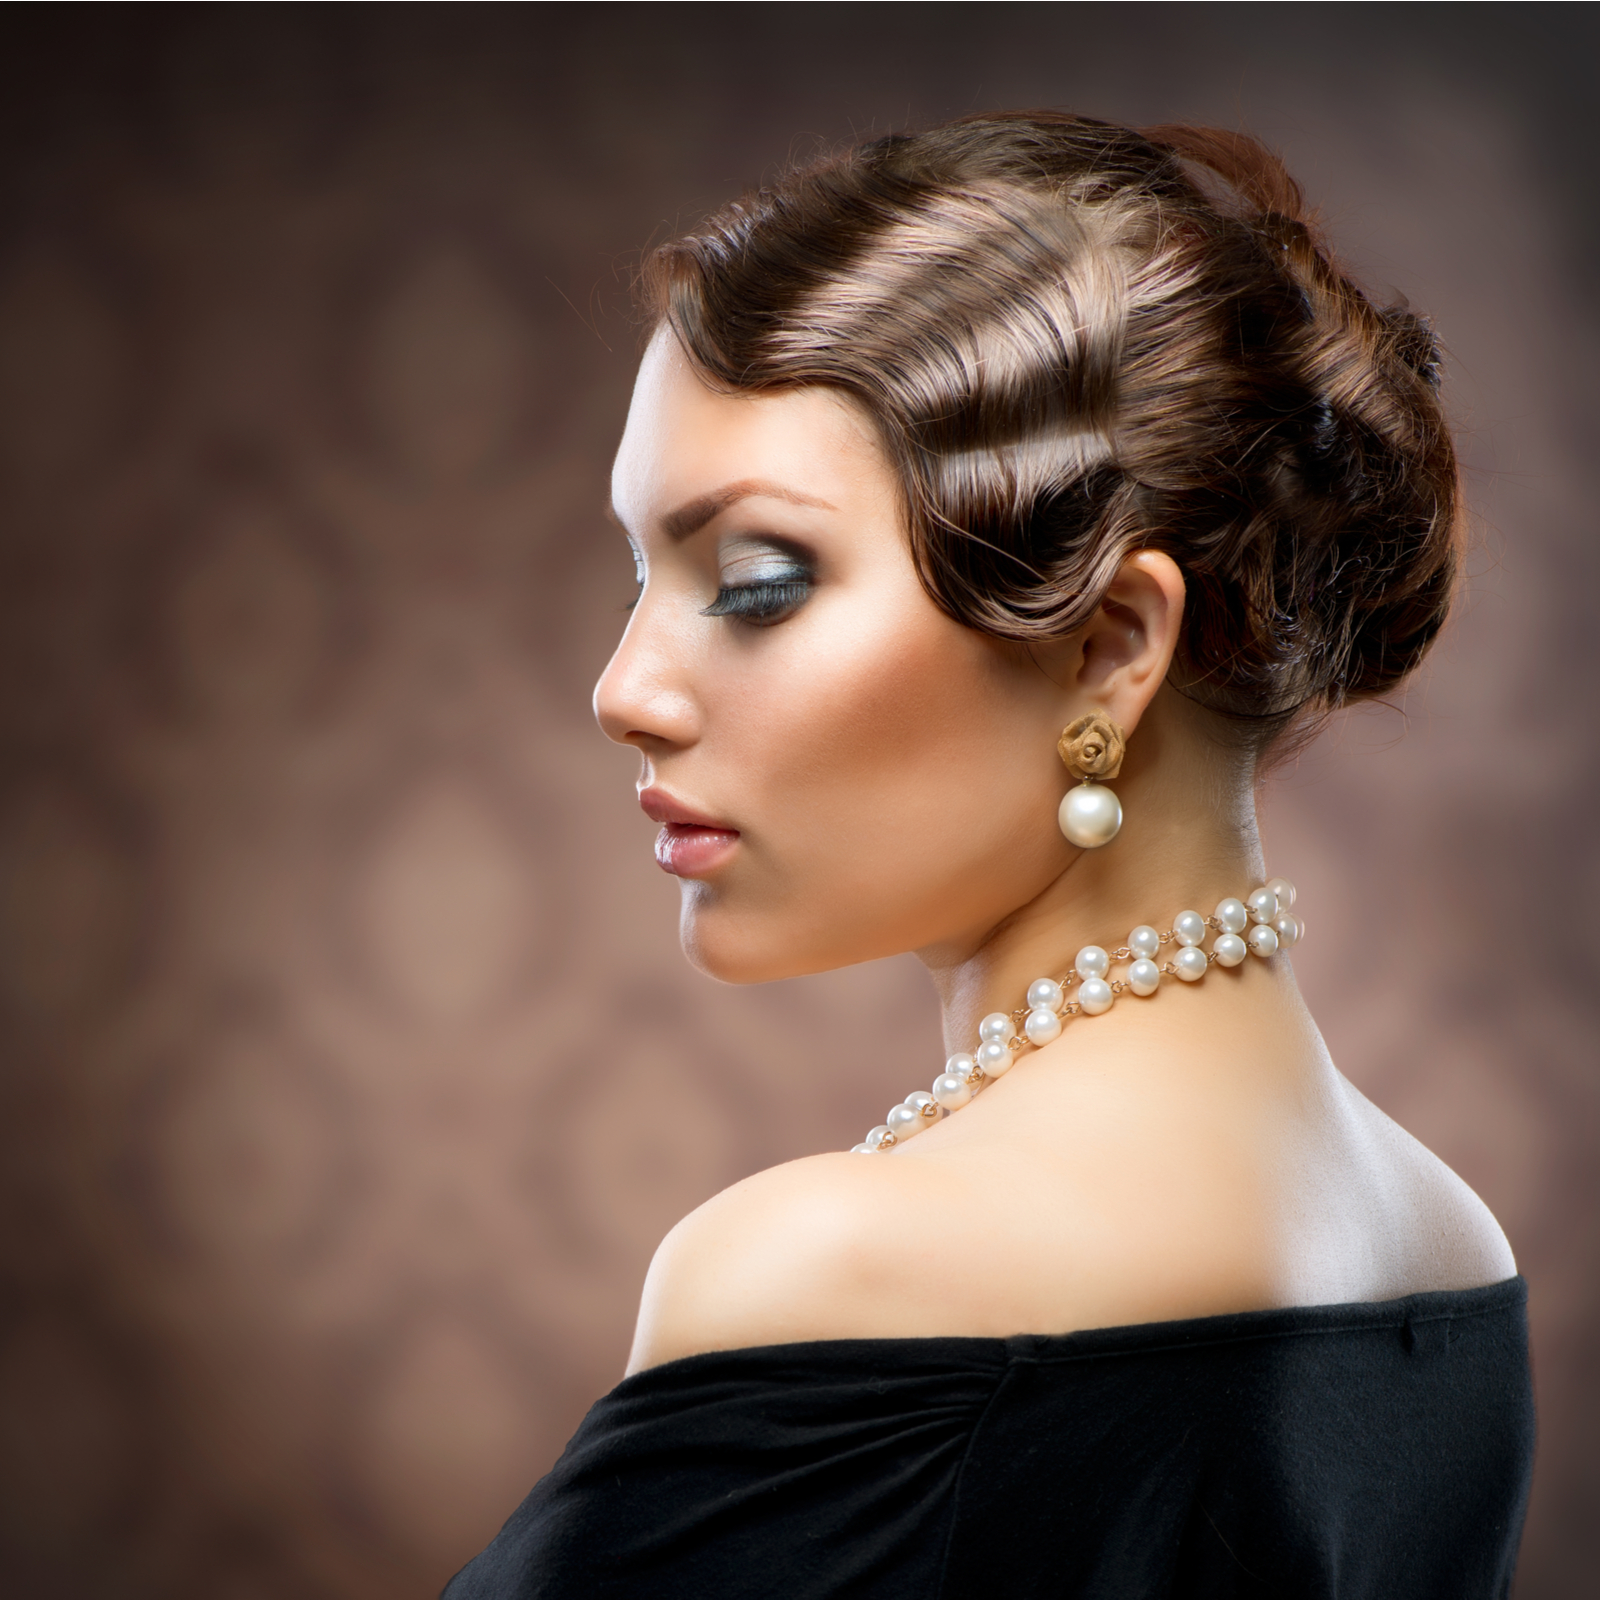 Retro looking woman with finger waves and pearls looks glam in a side profile photo